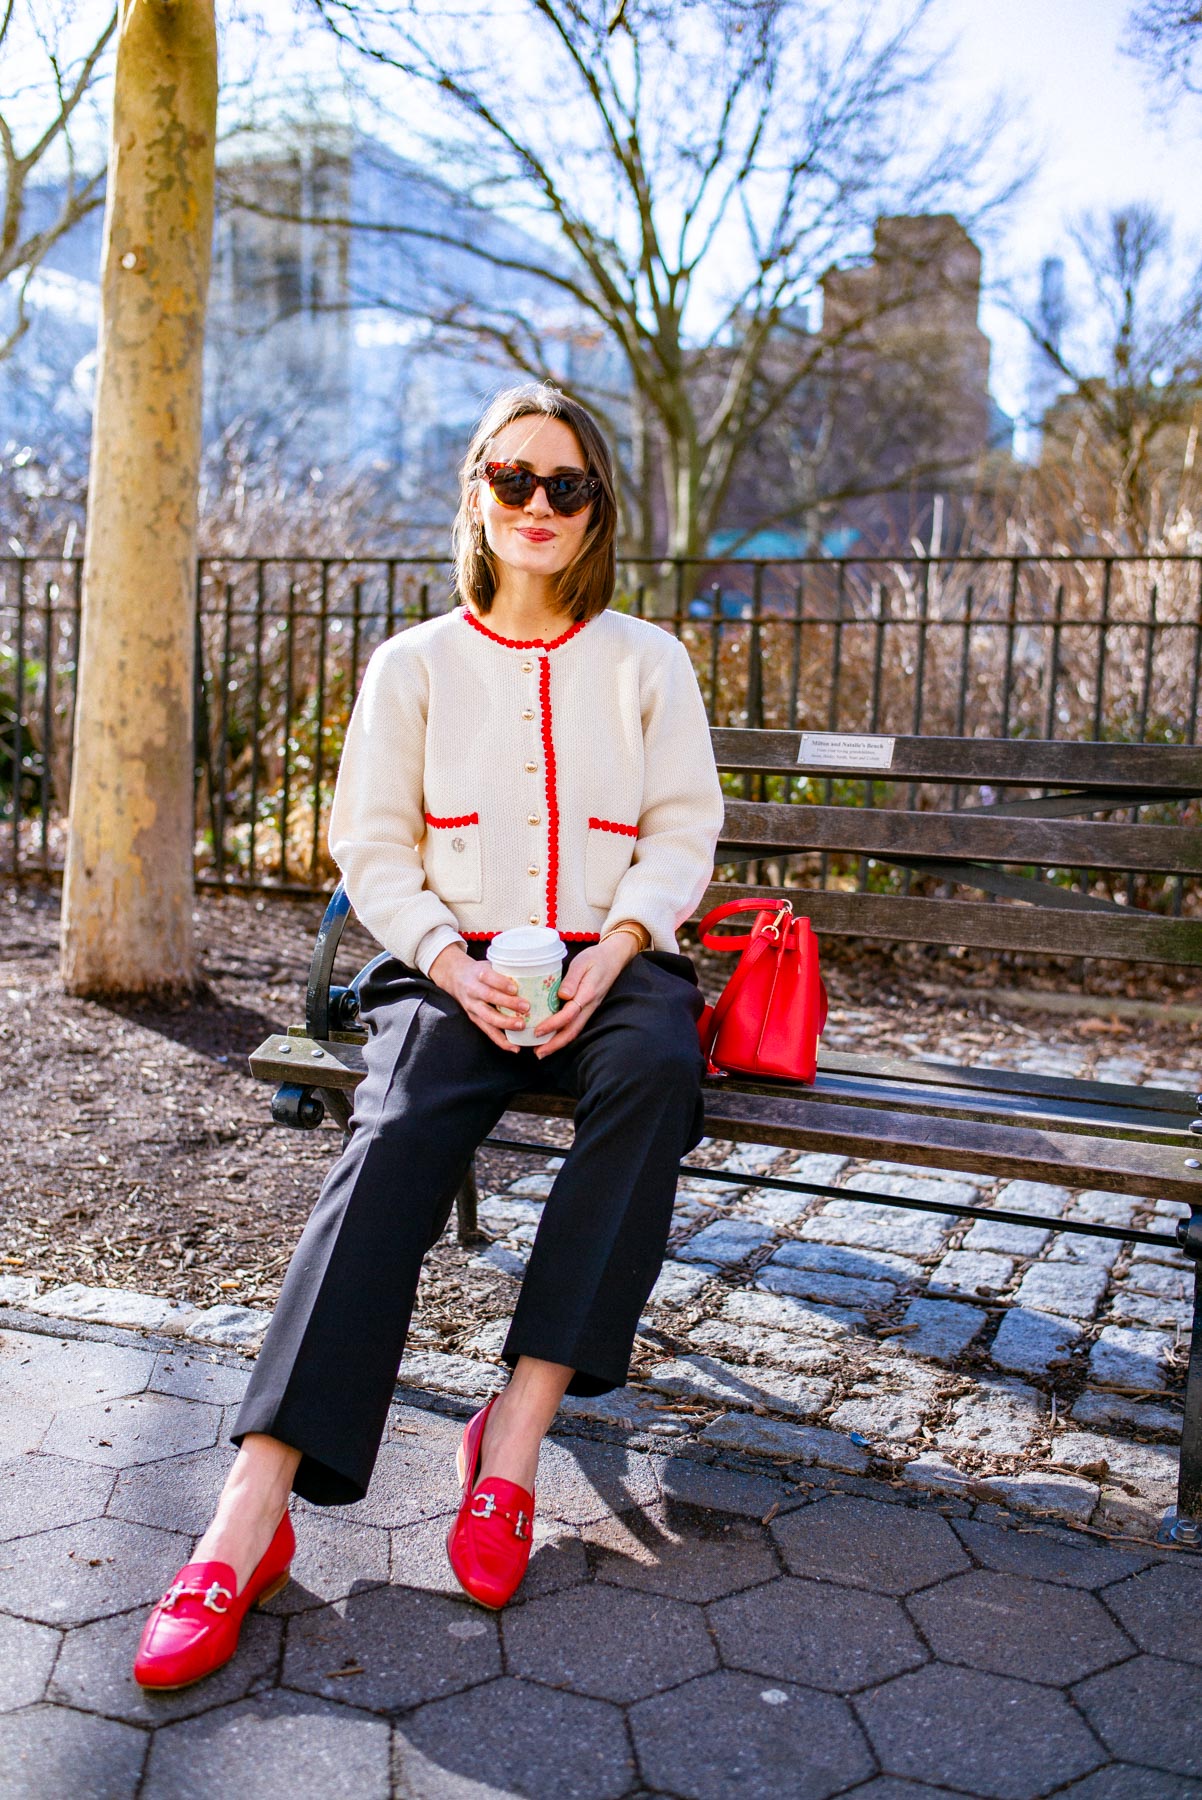 Trendy fashion woman sitting on a park bench with a bright red purse, red loafers, and red detailed cardigan 